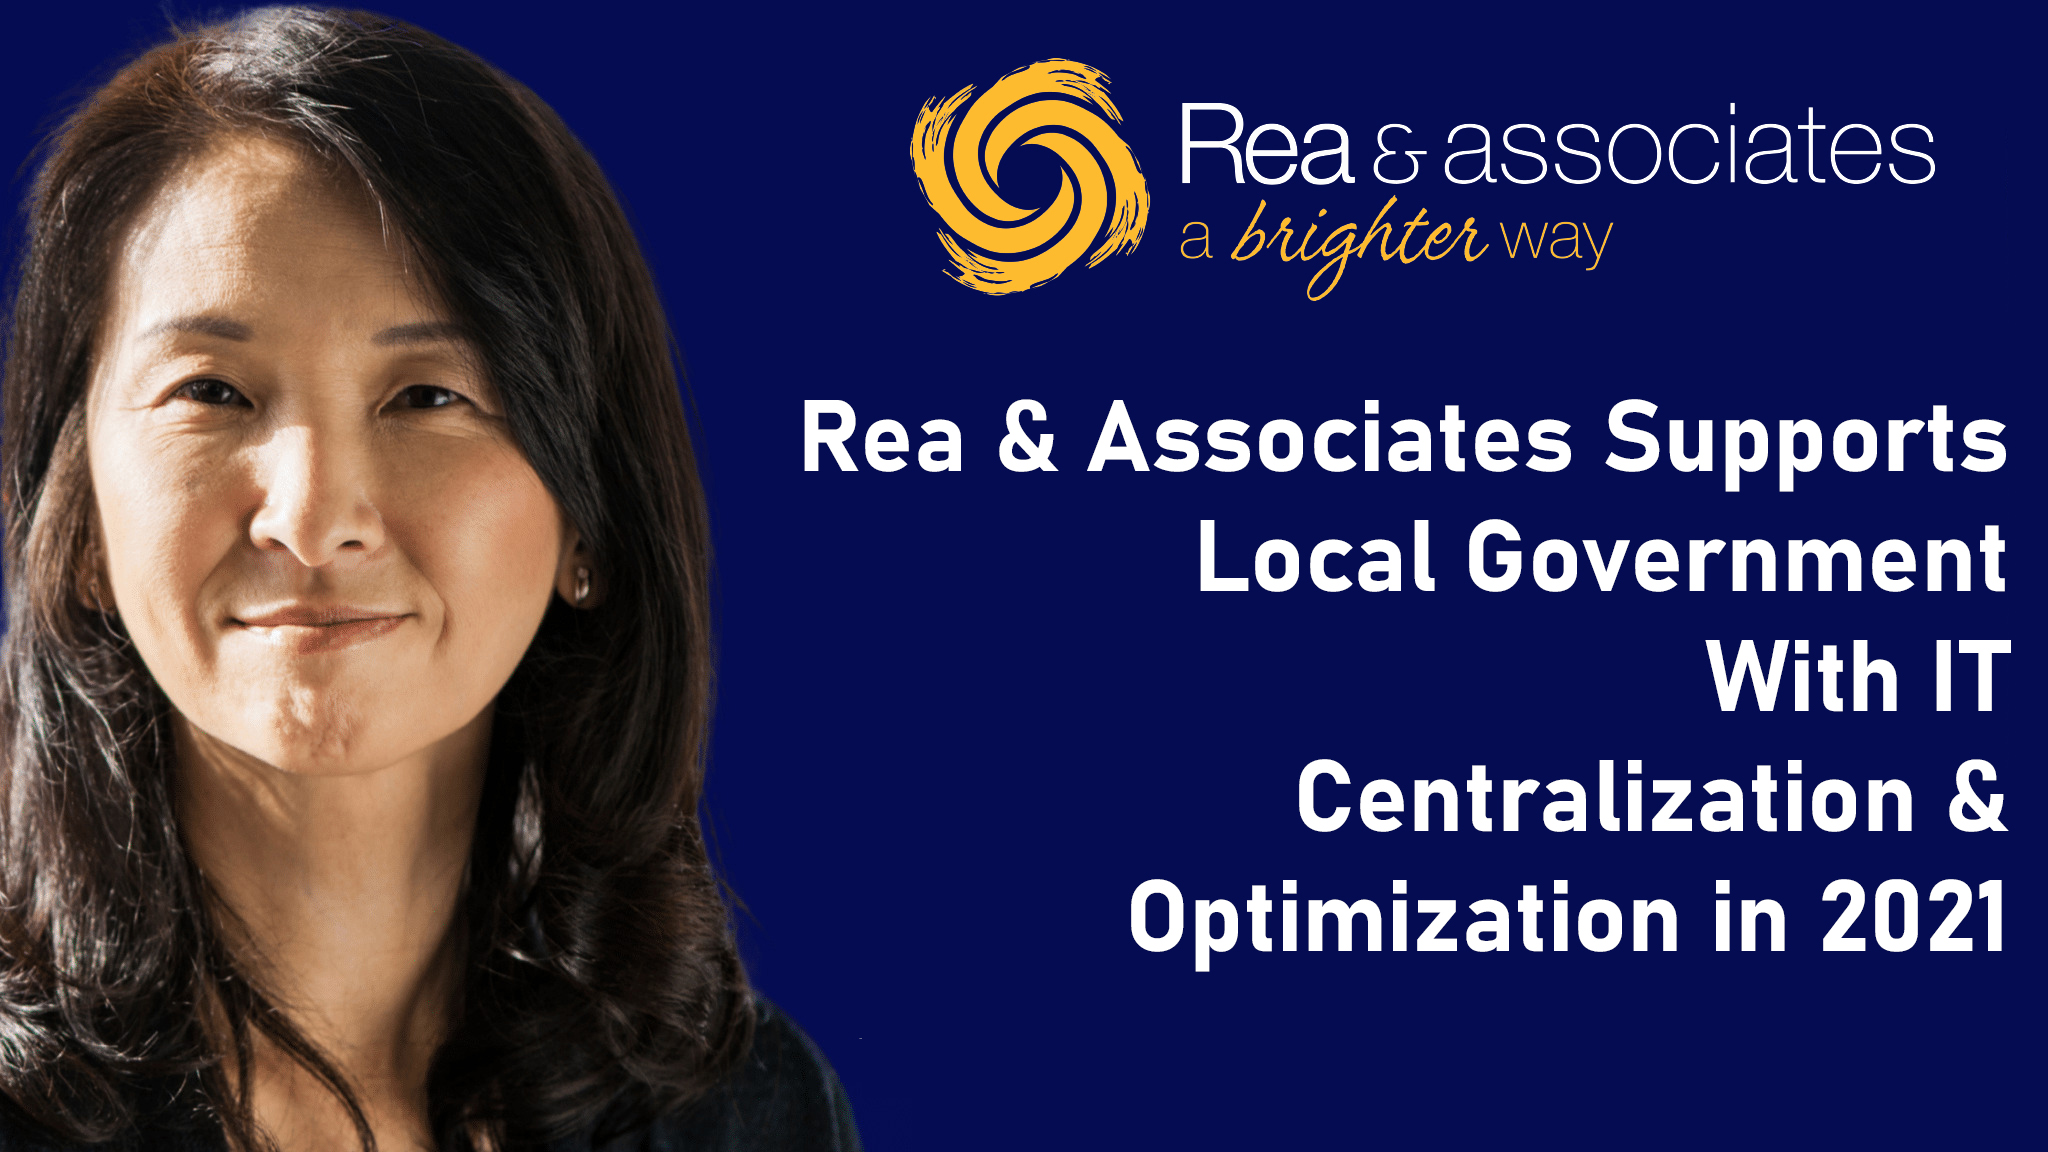 Rea & Associates Supports Local Government With IT Centralization & Optimization in 2021